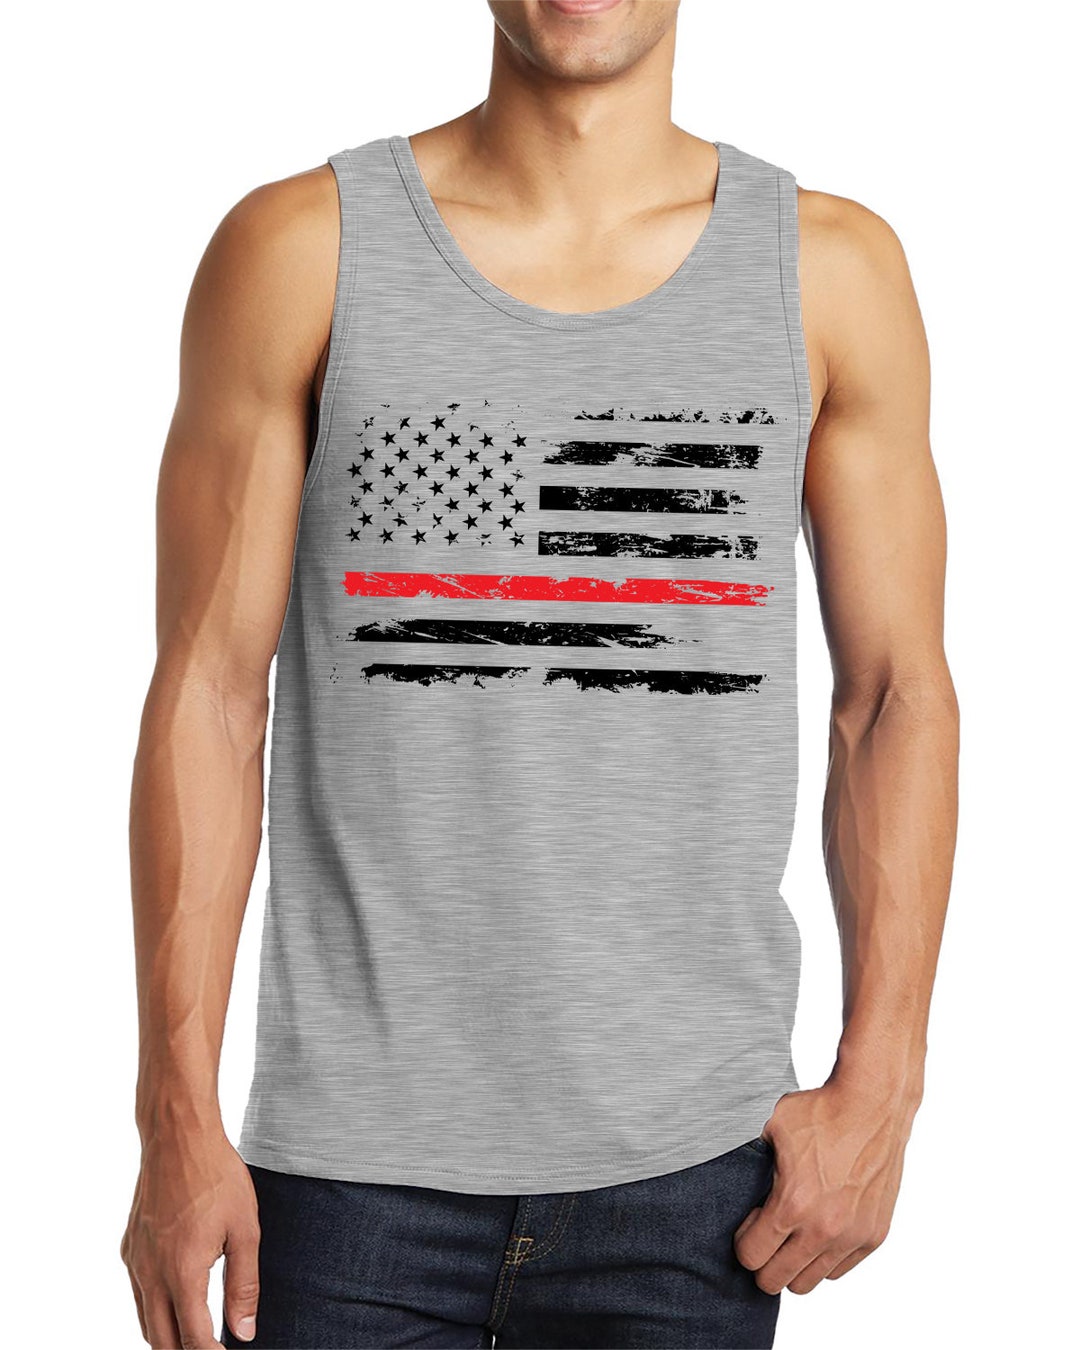 Red Line American Flag Fire Fighter First Responder Awareness - Etsy